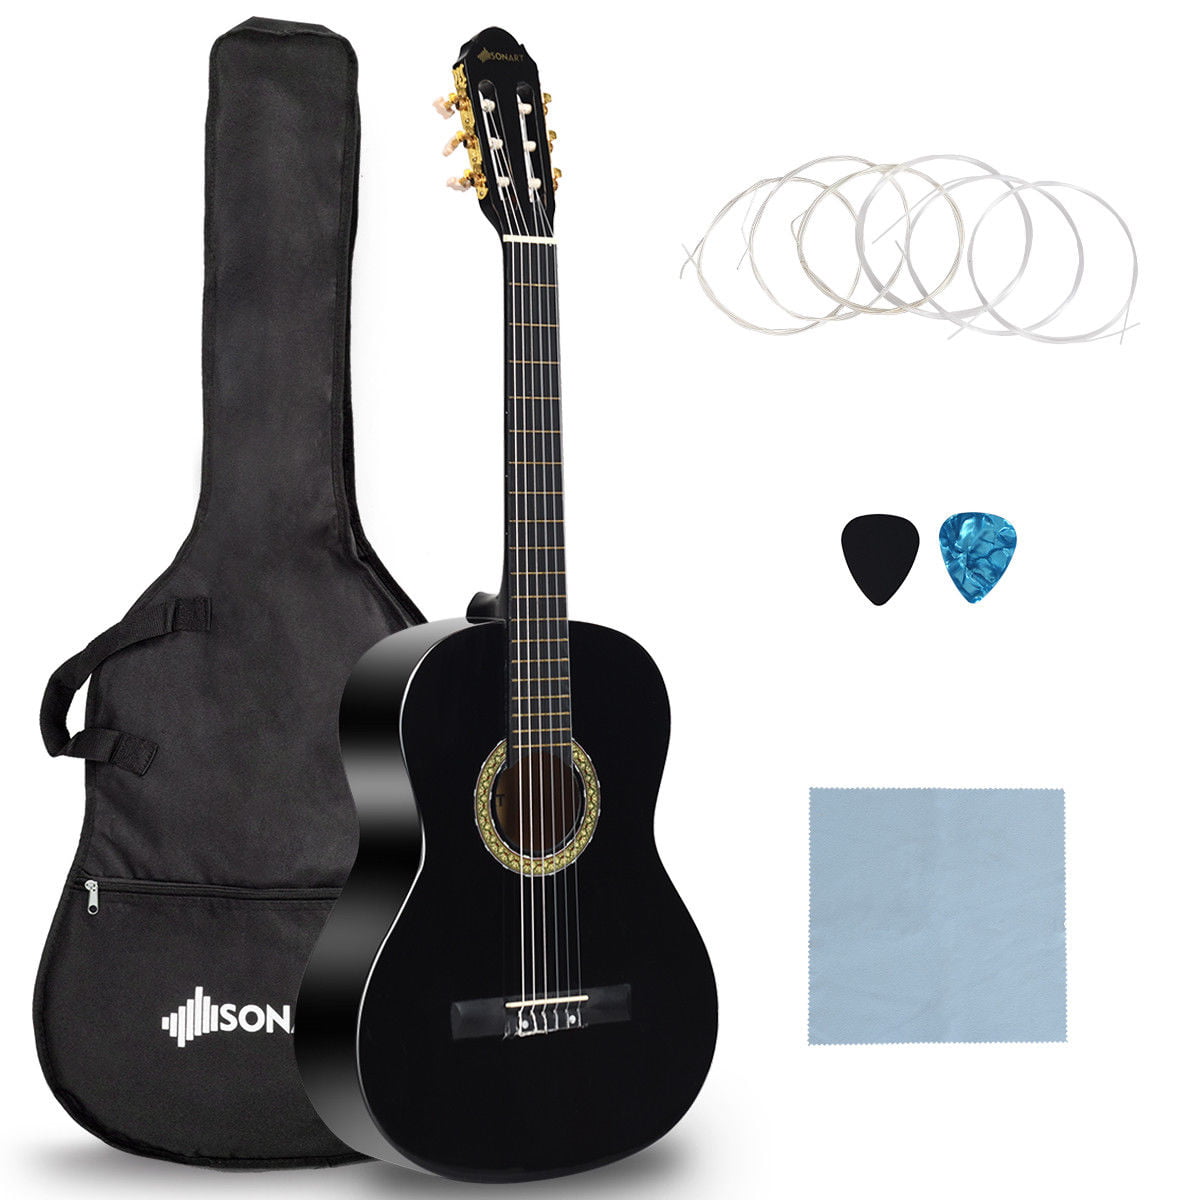 strings LCGQSY Classical Nylon String Beginner Acoustic Guitar Full-size Guitar 39 inch with tuner Wiping Cloth bag Wrench 